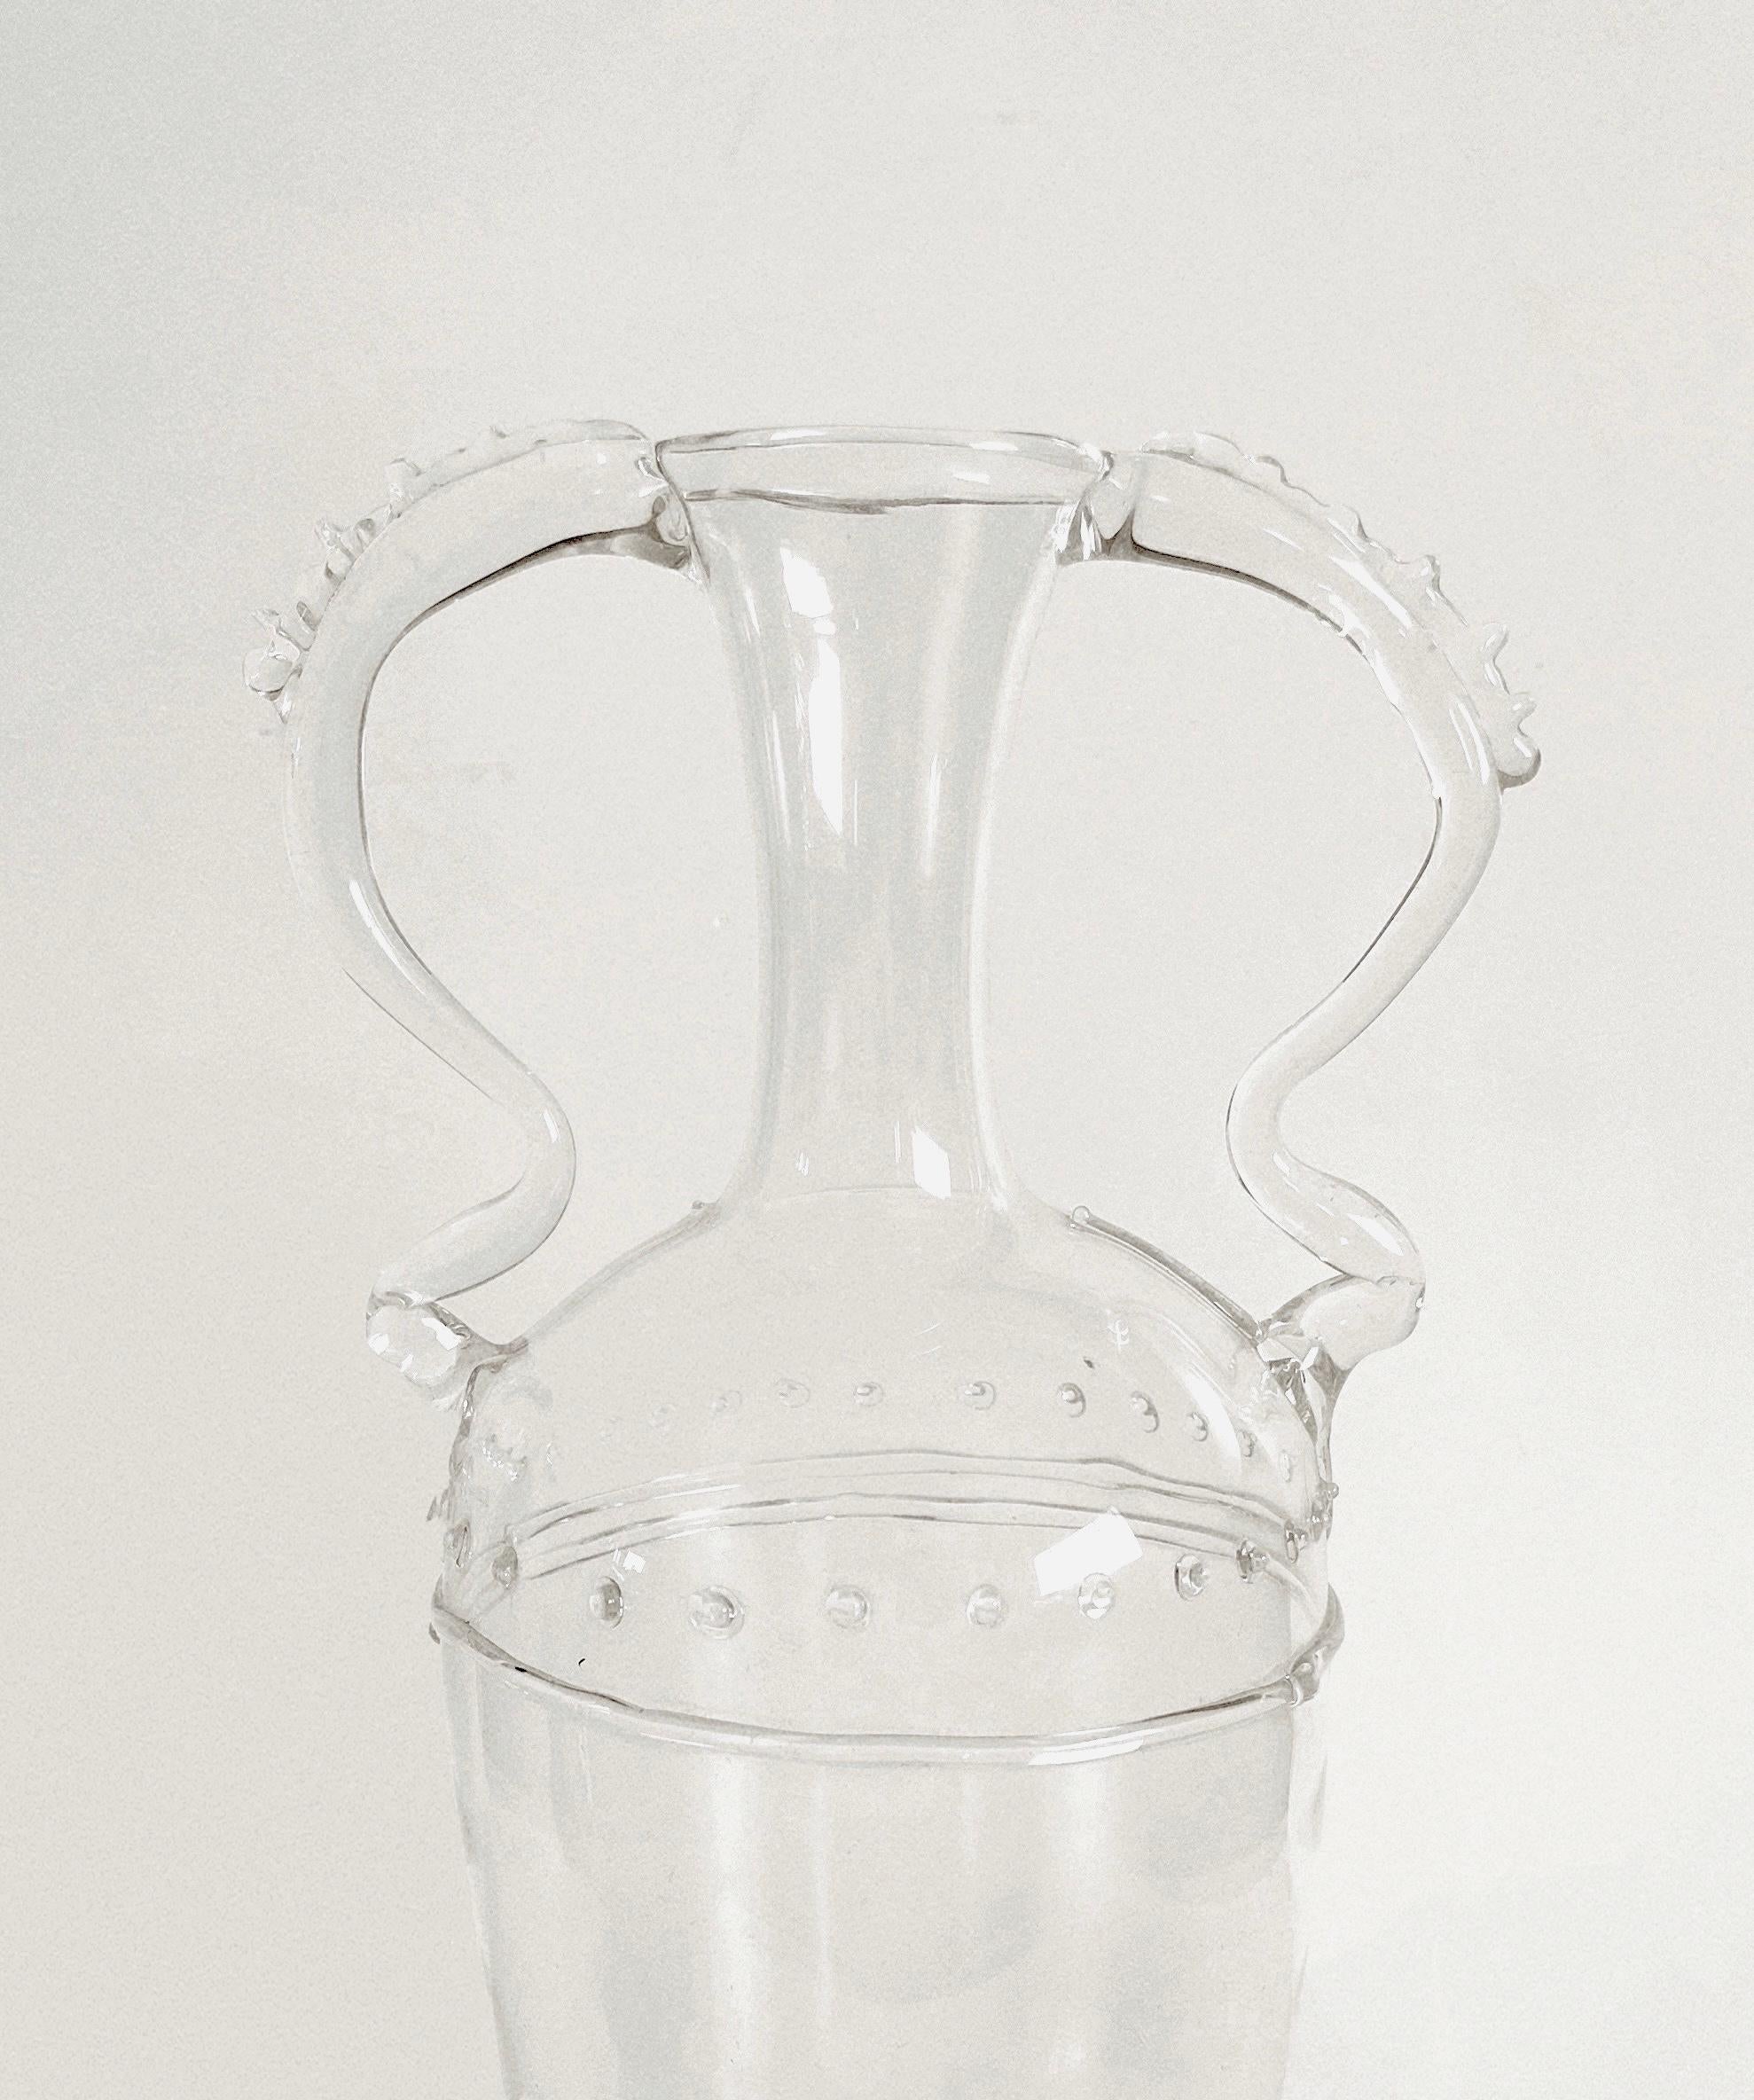 Delicate clear Murano glass vase by Vittorio Zecchin ca. 1930. Pristine condition, no chips or cracks. Price is for the one vase, partner vase available via separate listing.